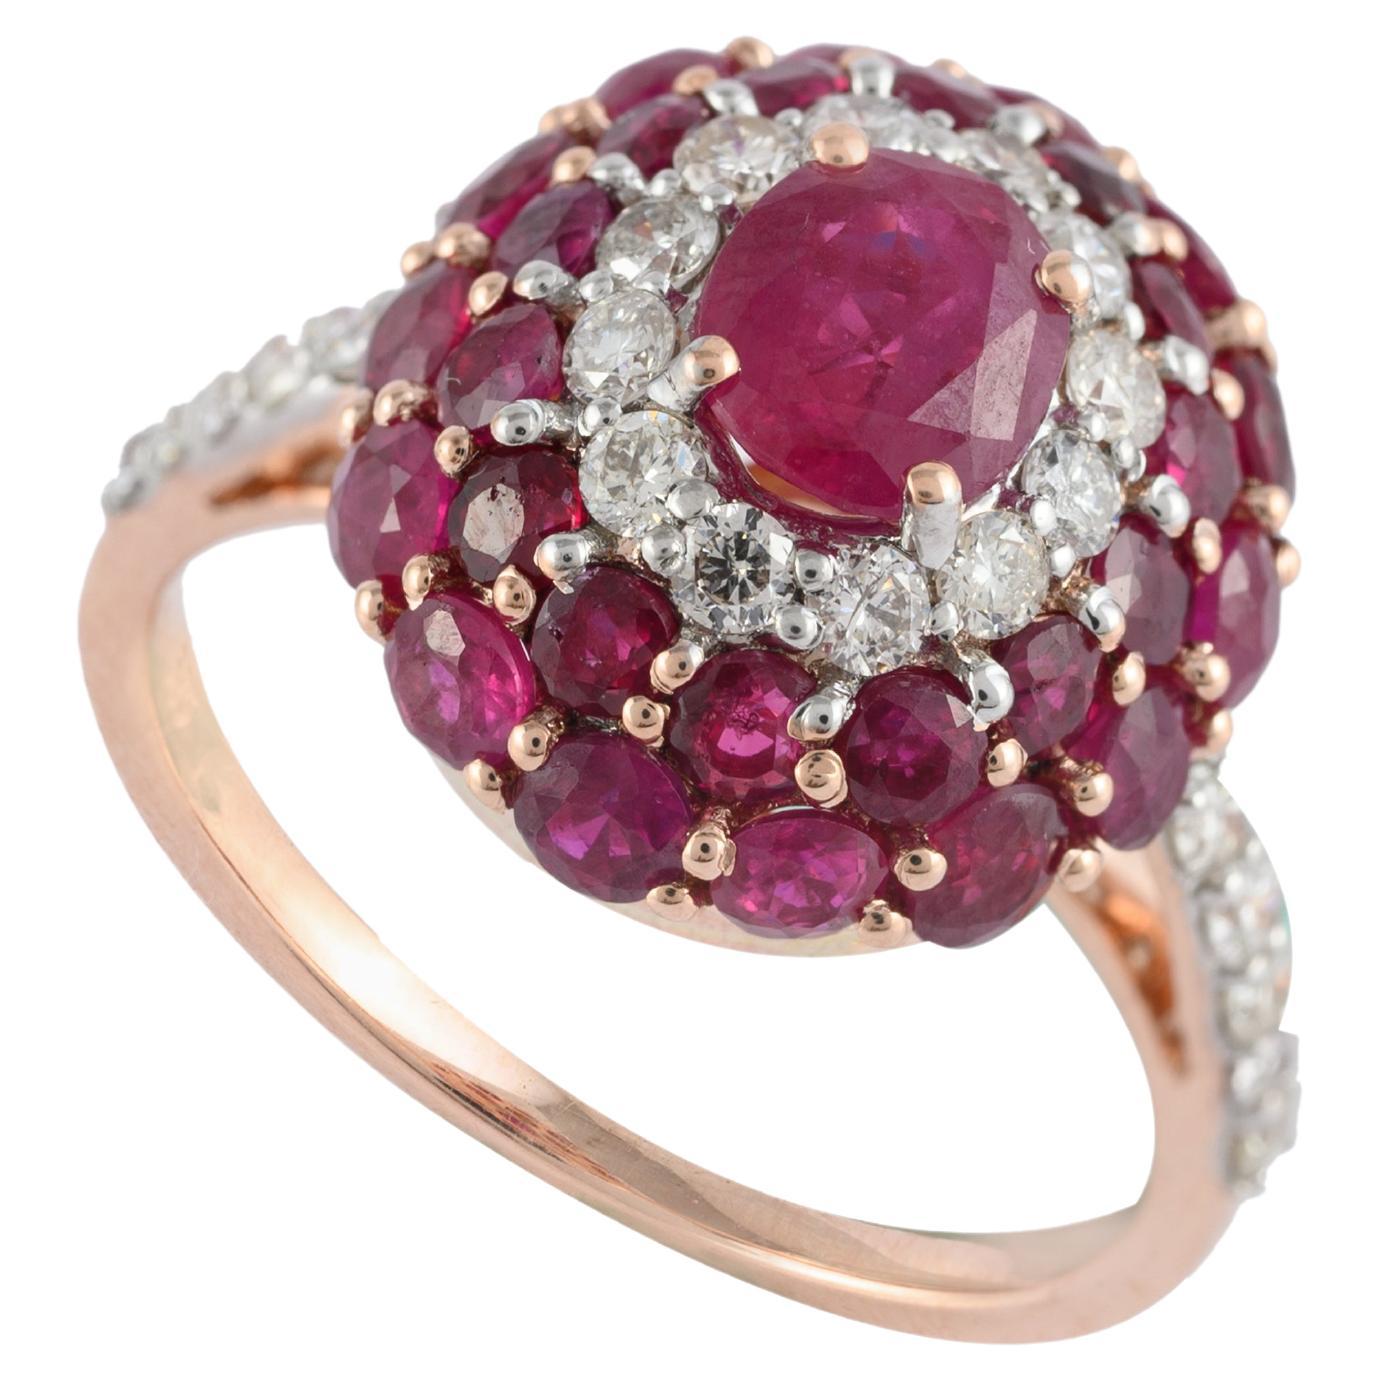 For Sale:  2.76 Carat Natural Ruby Cluster Ring in 14k Solid Rose Gold with Diamonds